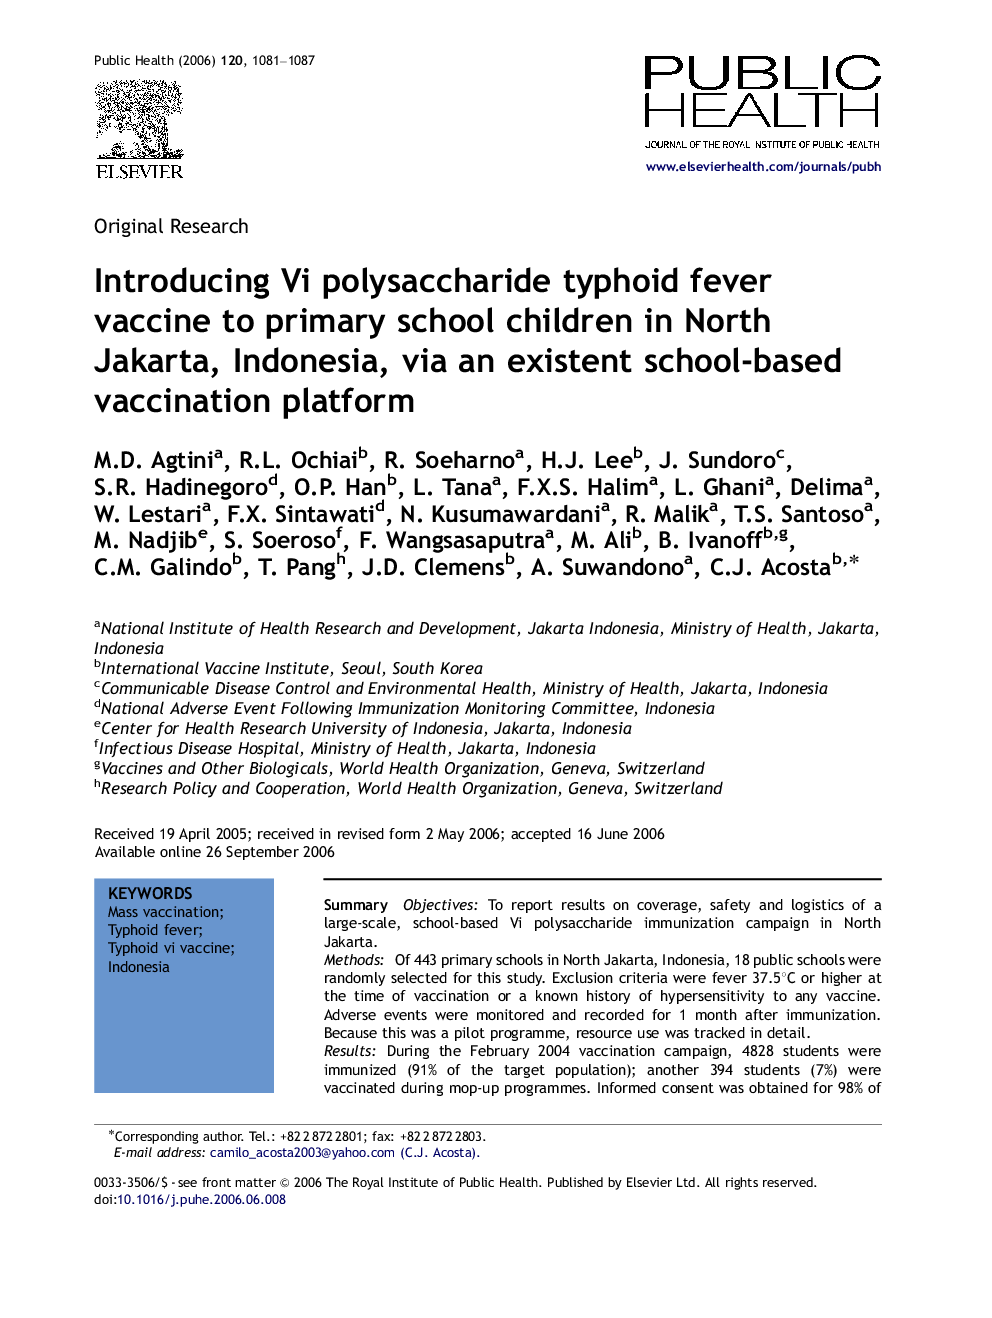 Introducing Vi polysaccharide typhoid fever vaccine to primary school children in North Jakarta, Indonesia, via an existent school-based vaccination platform